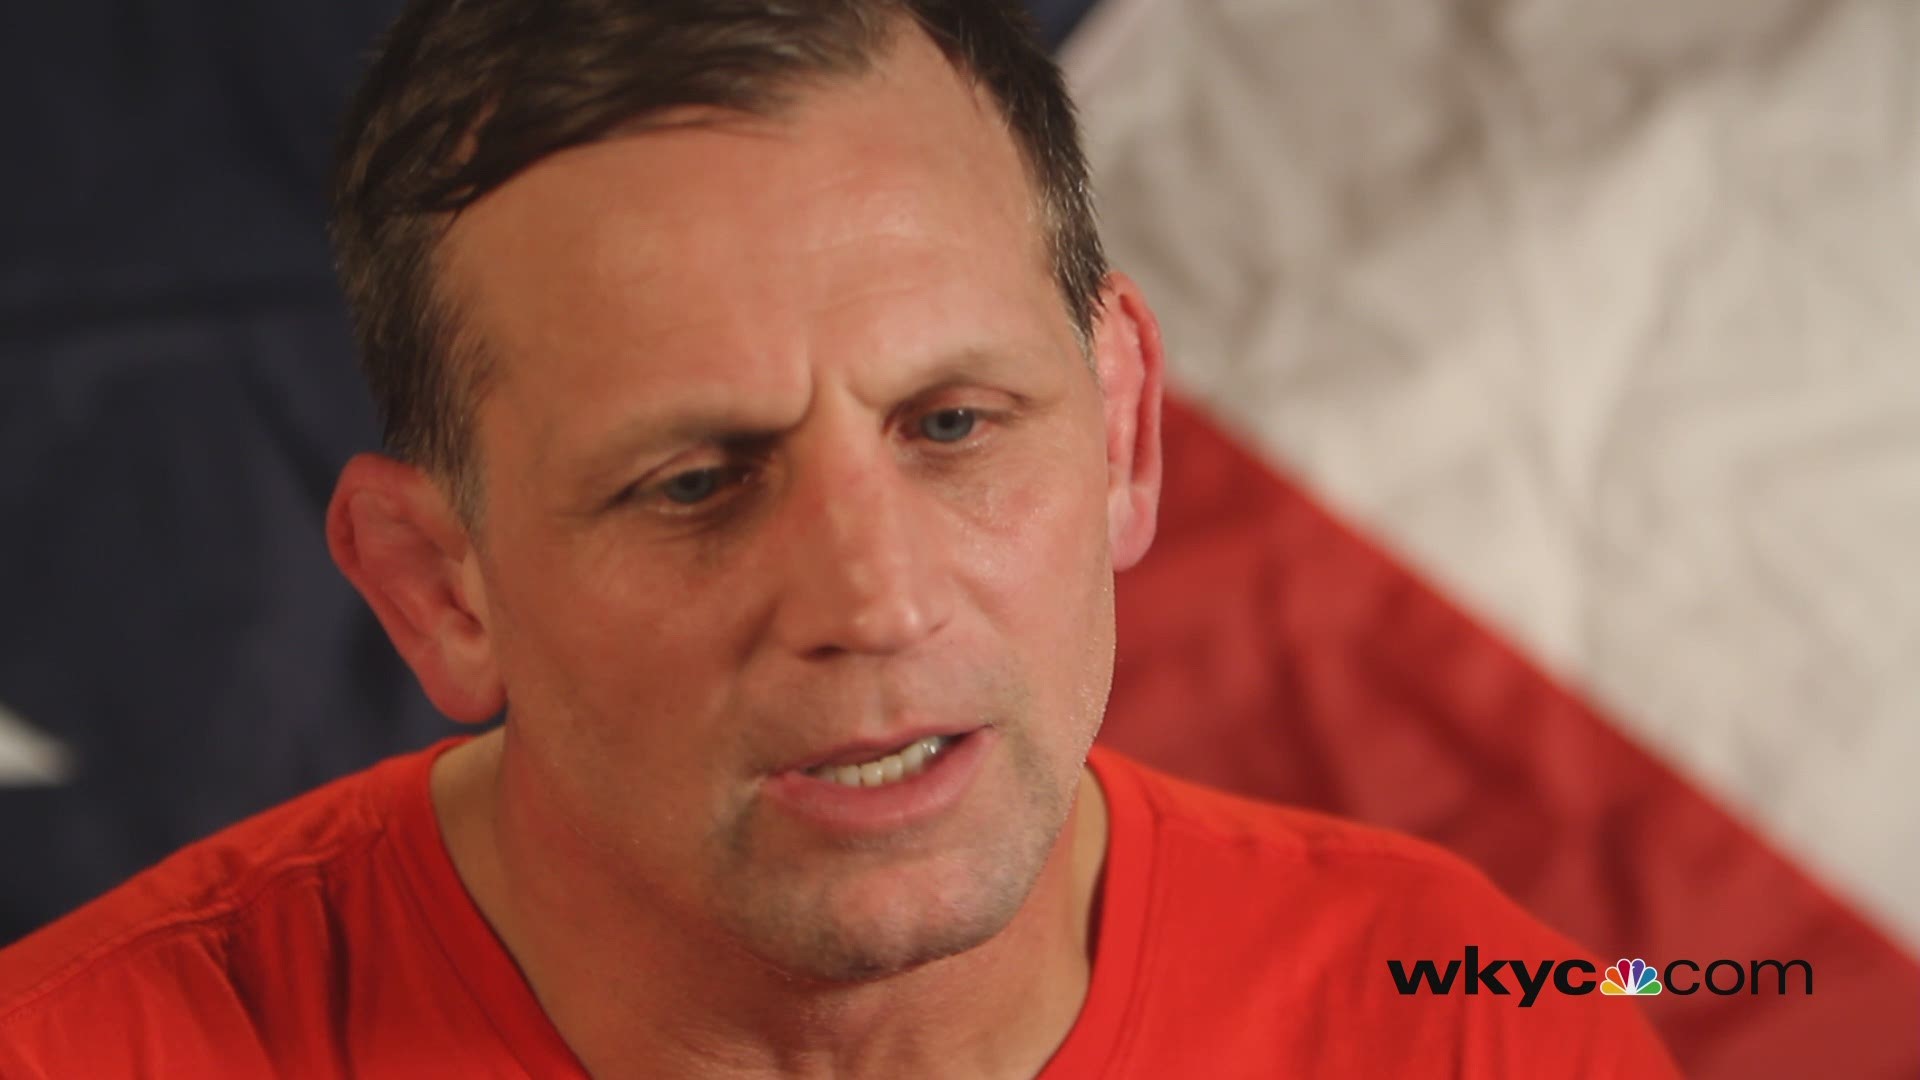 Head Coach of the 2015 National Champion Ohio State Buckeyes Tom Ryan talks about how the State of Ohio is the secret to his success. The Ohio State Buckeyes were the 2015 NCAA National Champions and Co-Champions in the Big Ten led by Parma's Nathan Tomasello and Monroeville's Logan Stieber.